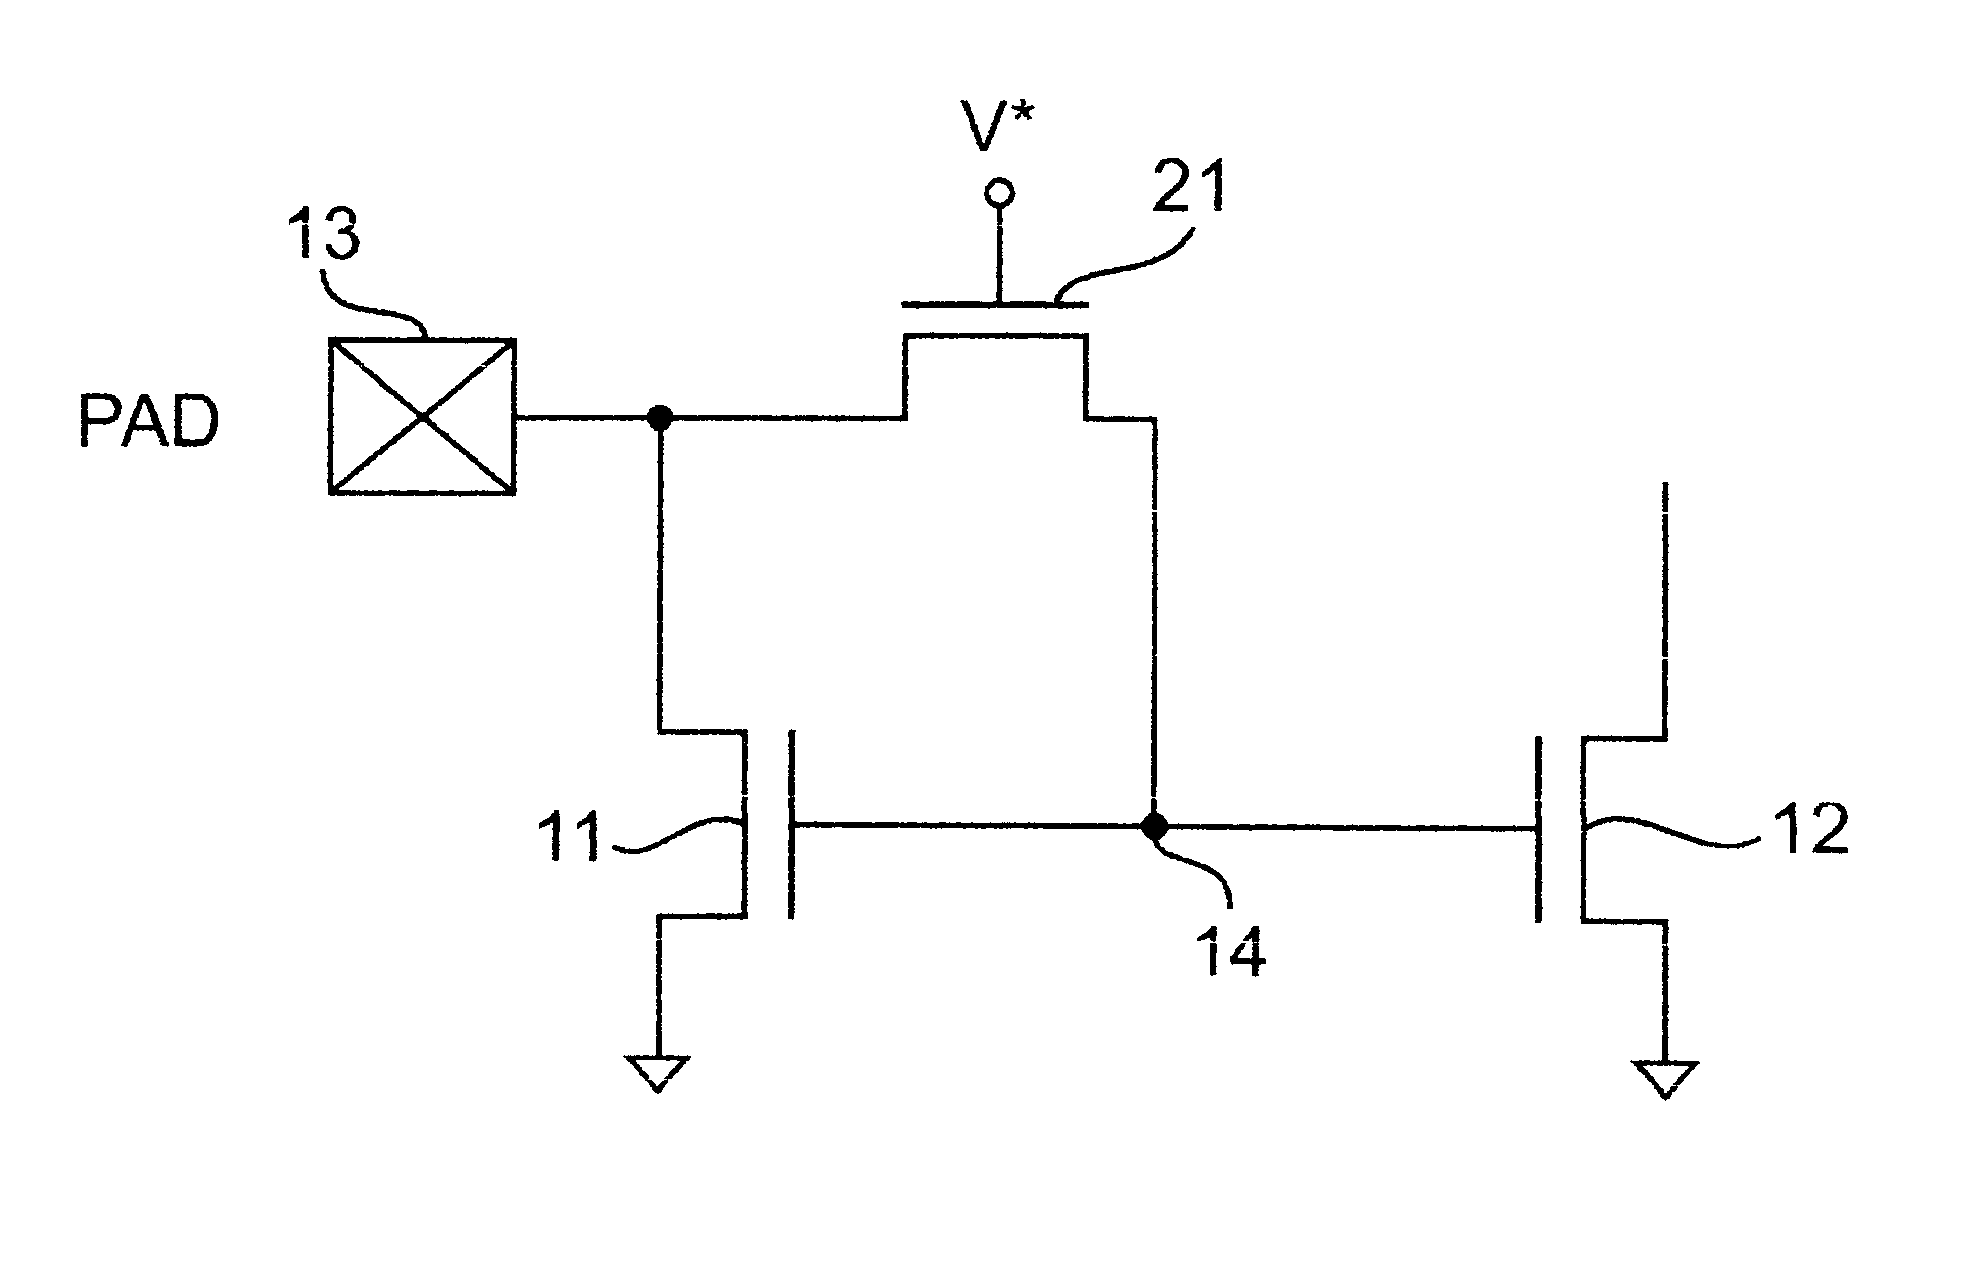 Modified current mirror circuit for BiCMOS application